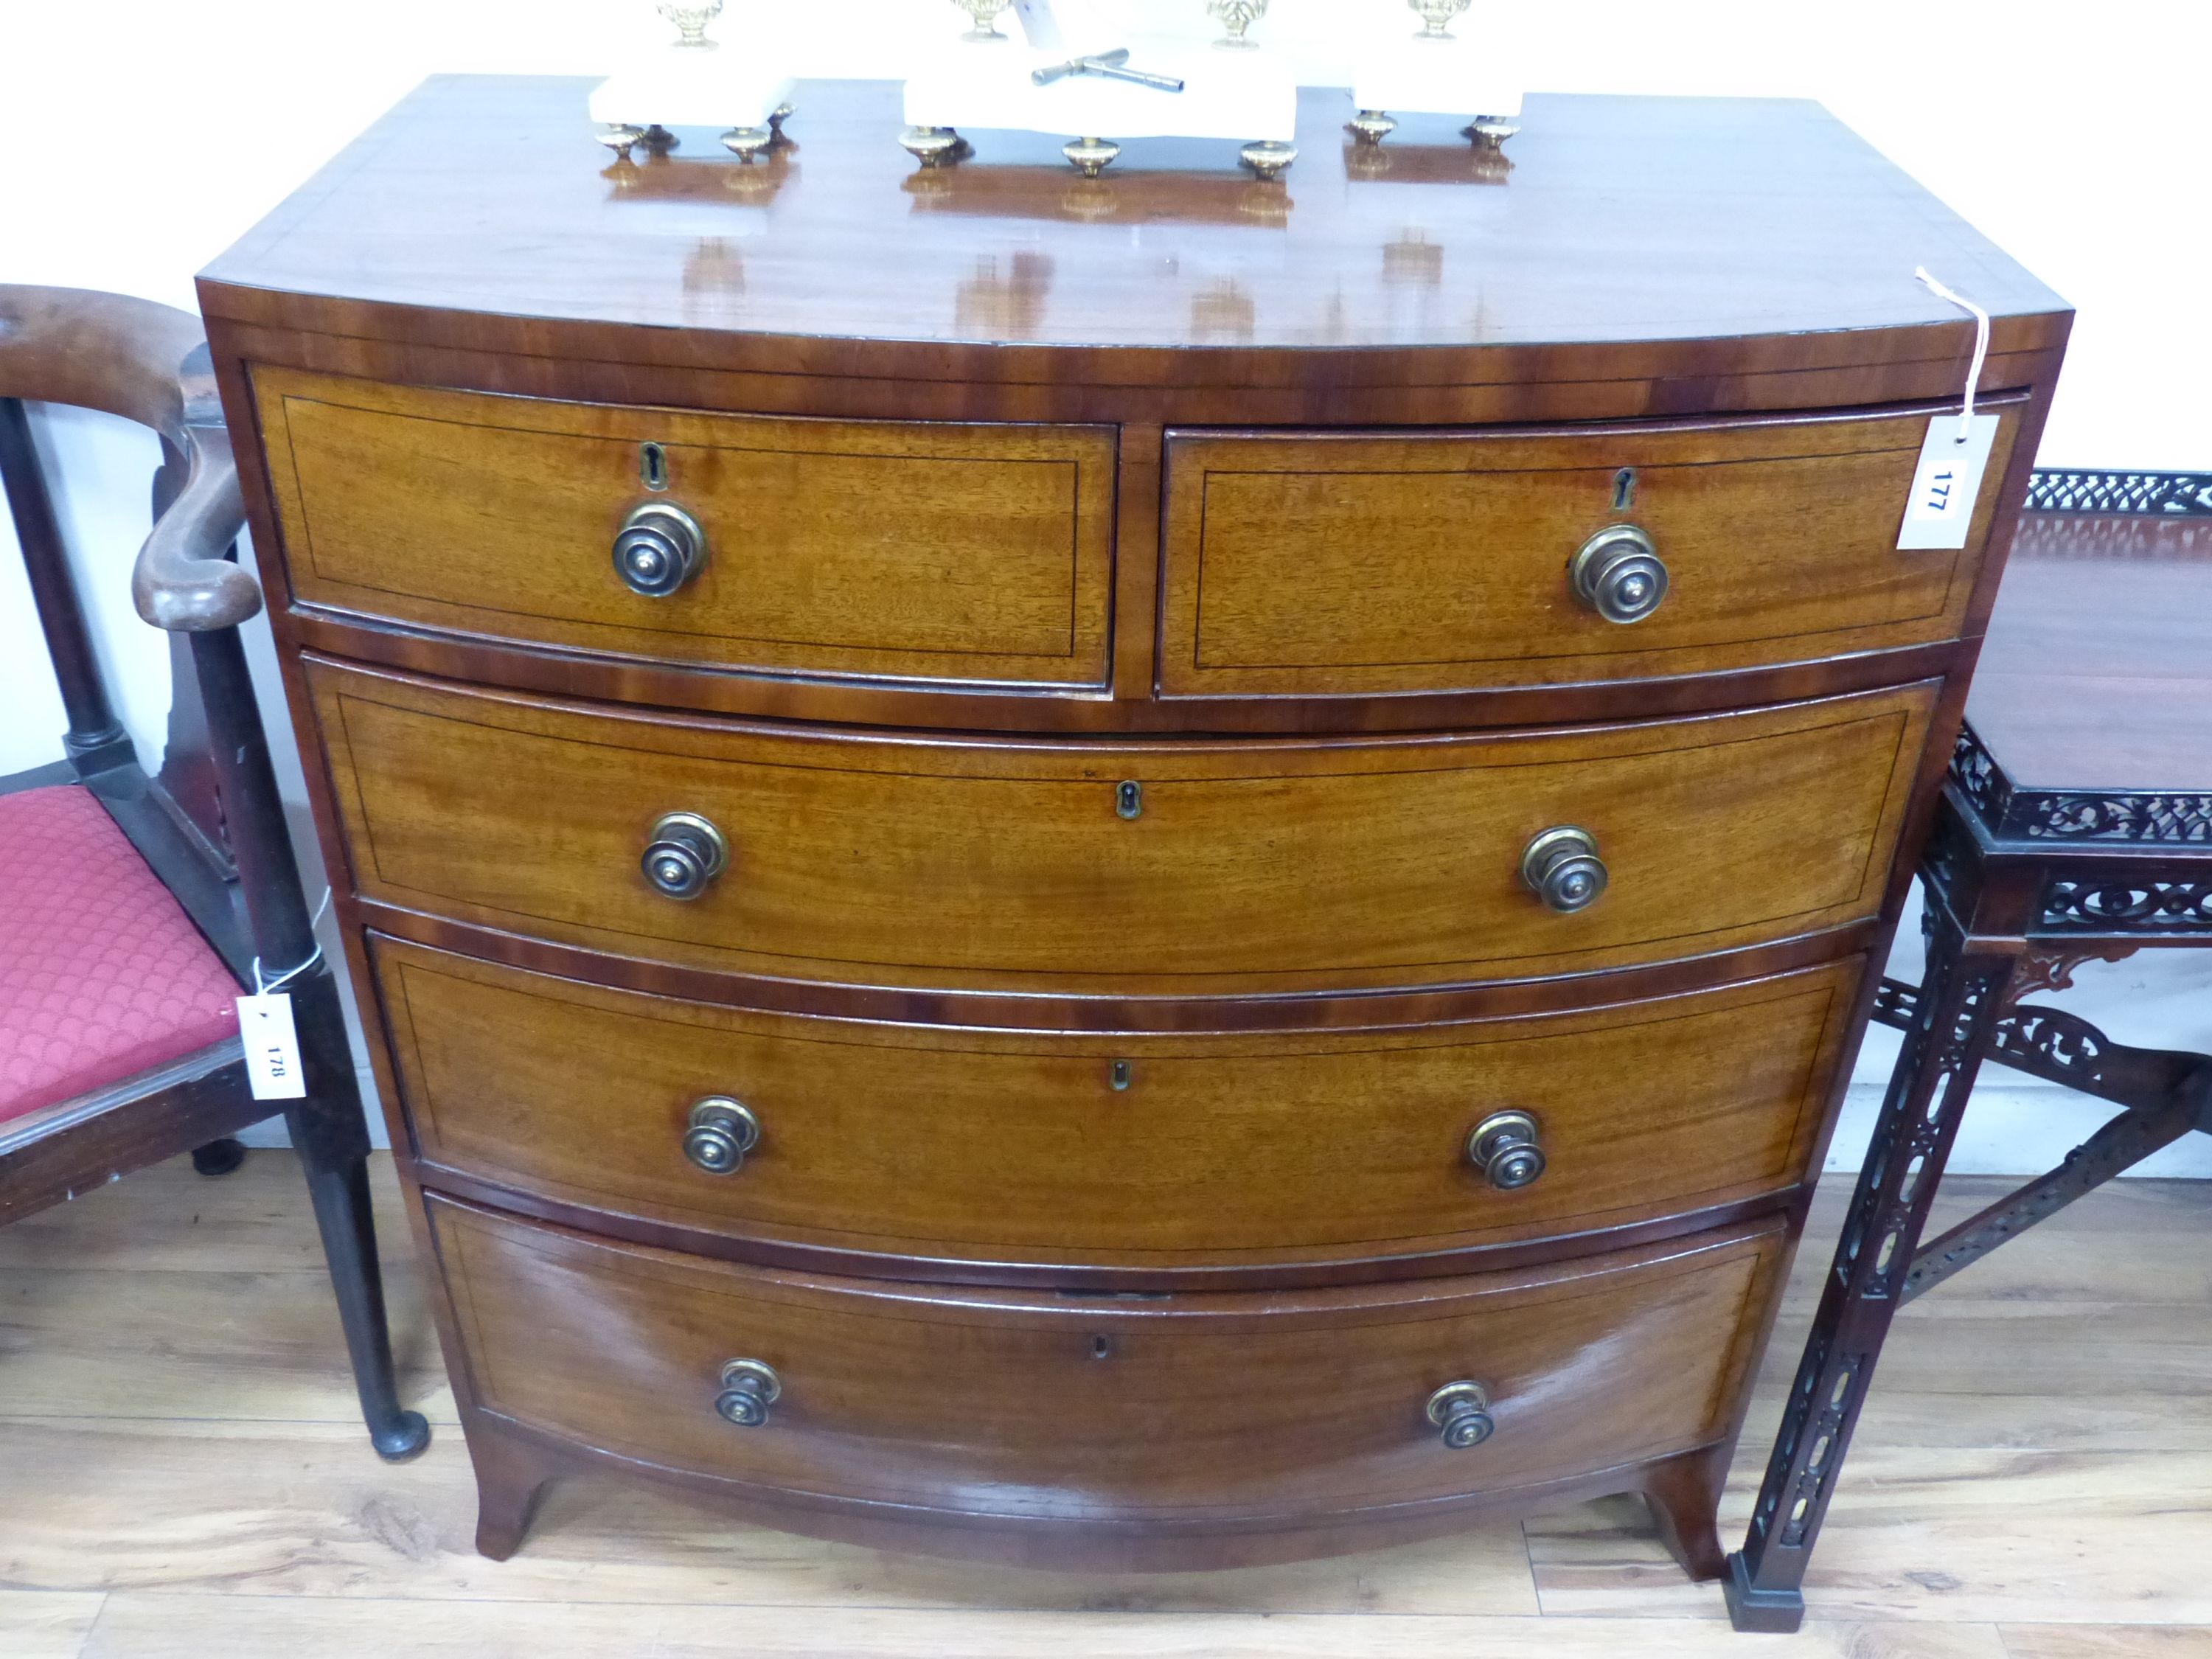 An early 19th century bow fronted mahogany chest, width 91cm, depth 50cm, height 97cm